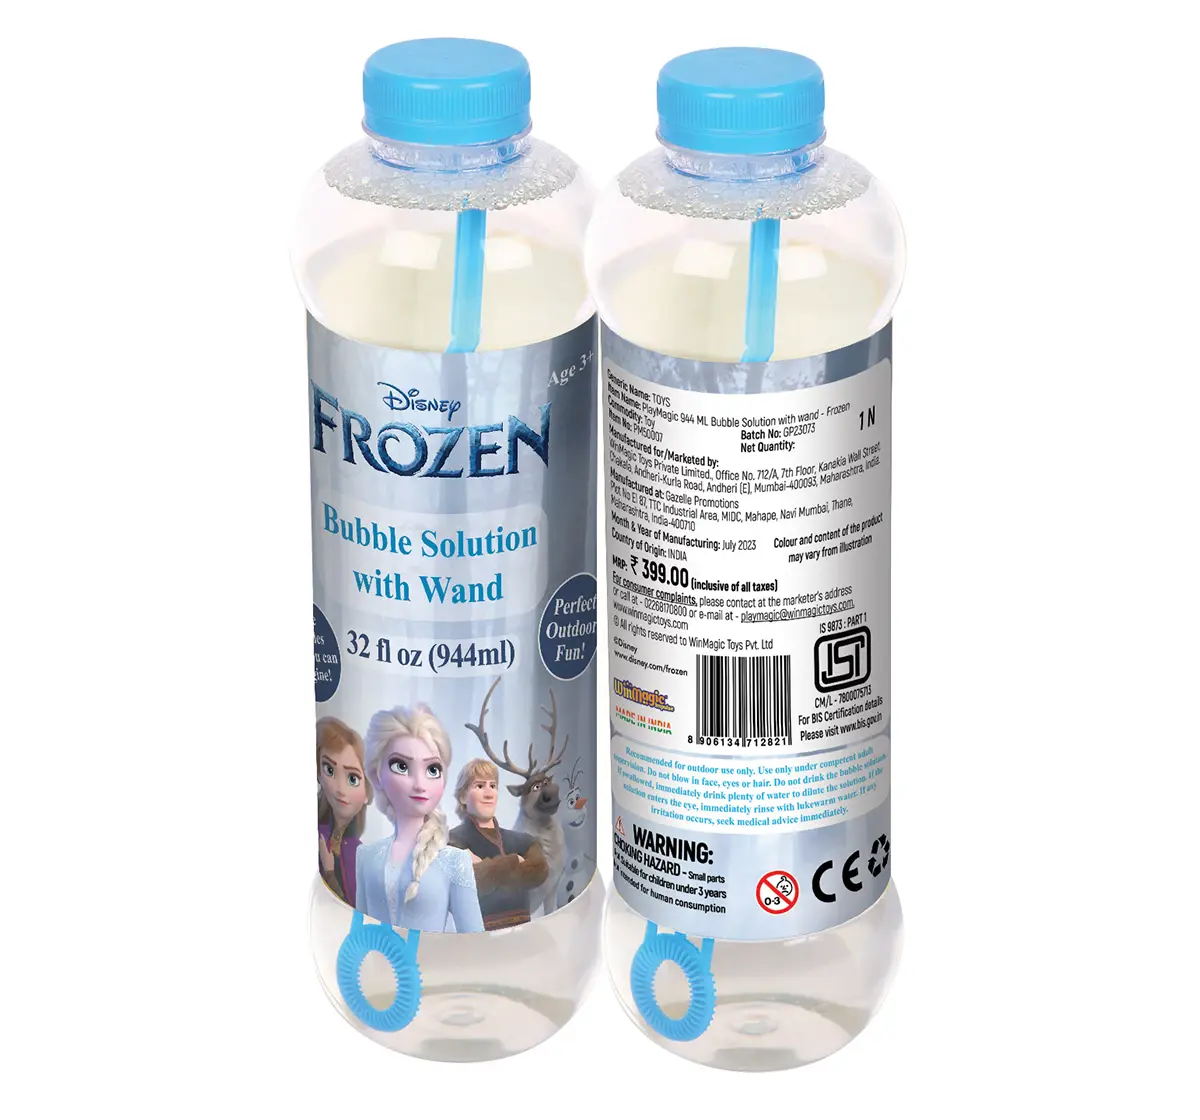 PlayMagic 944 ML Bubble Solution With Wand Frozen For Kids of Age 3Y+, Multicolour